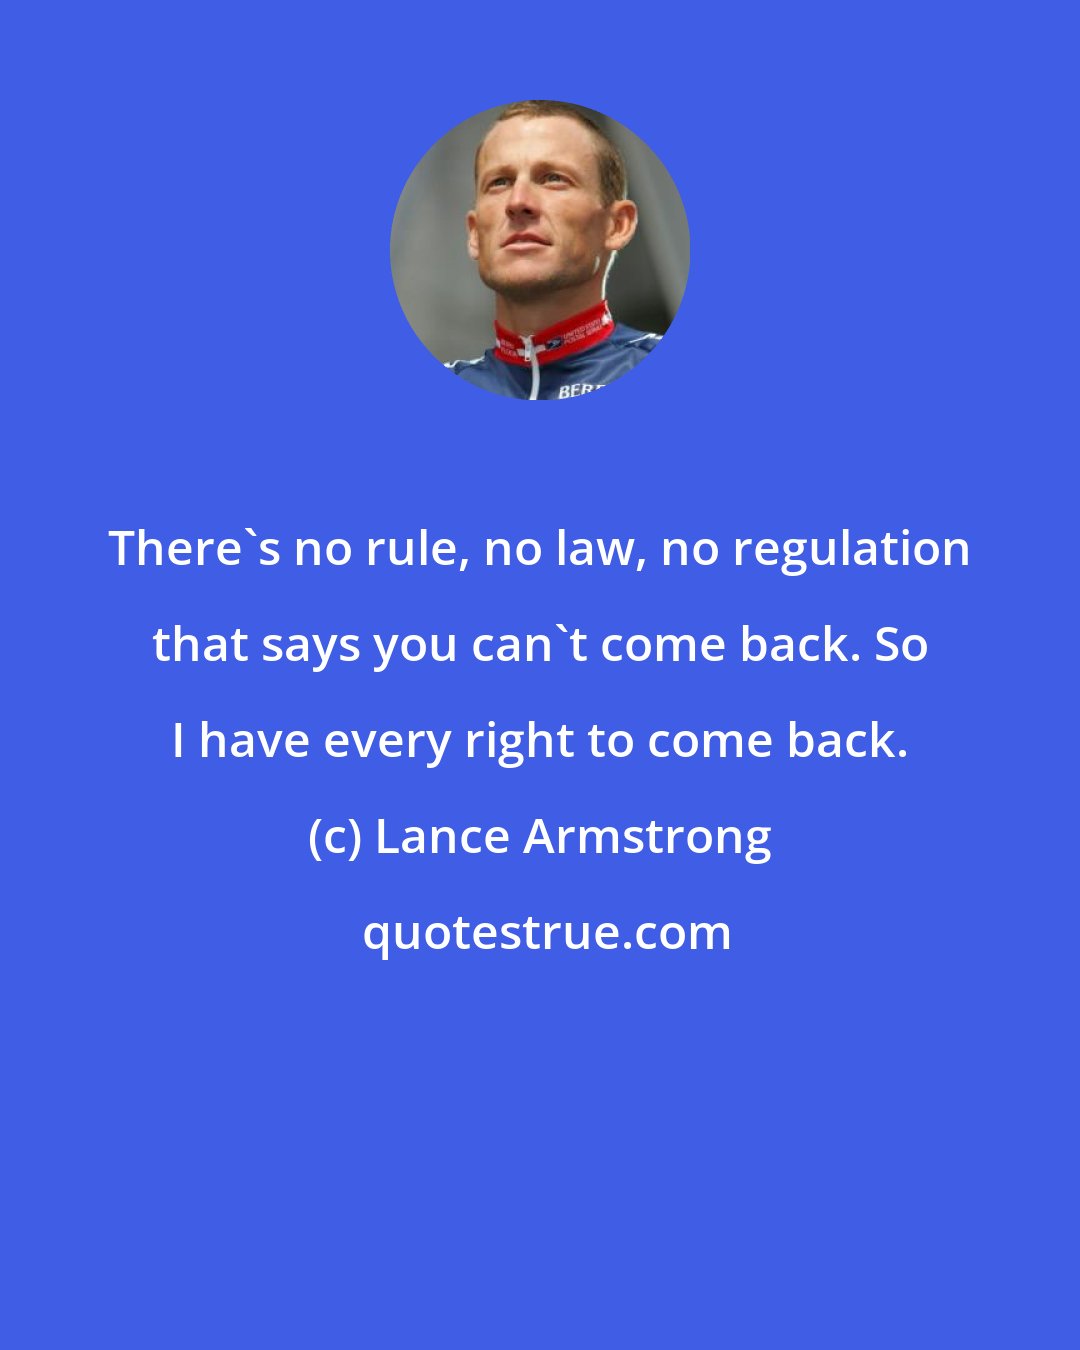 Lance Armstrong: There's no rule, no law, no regulation that says you can't come back. So I have every right to come back.